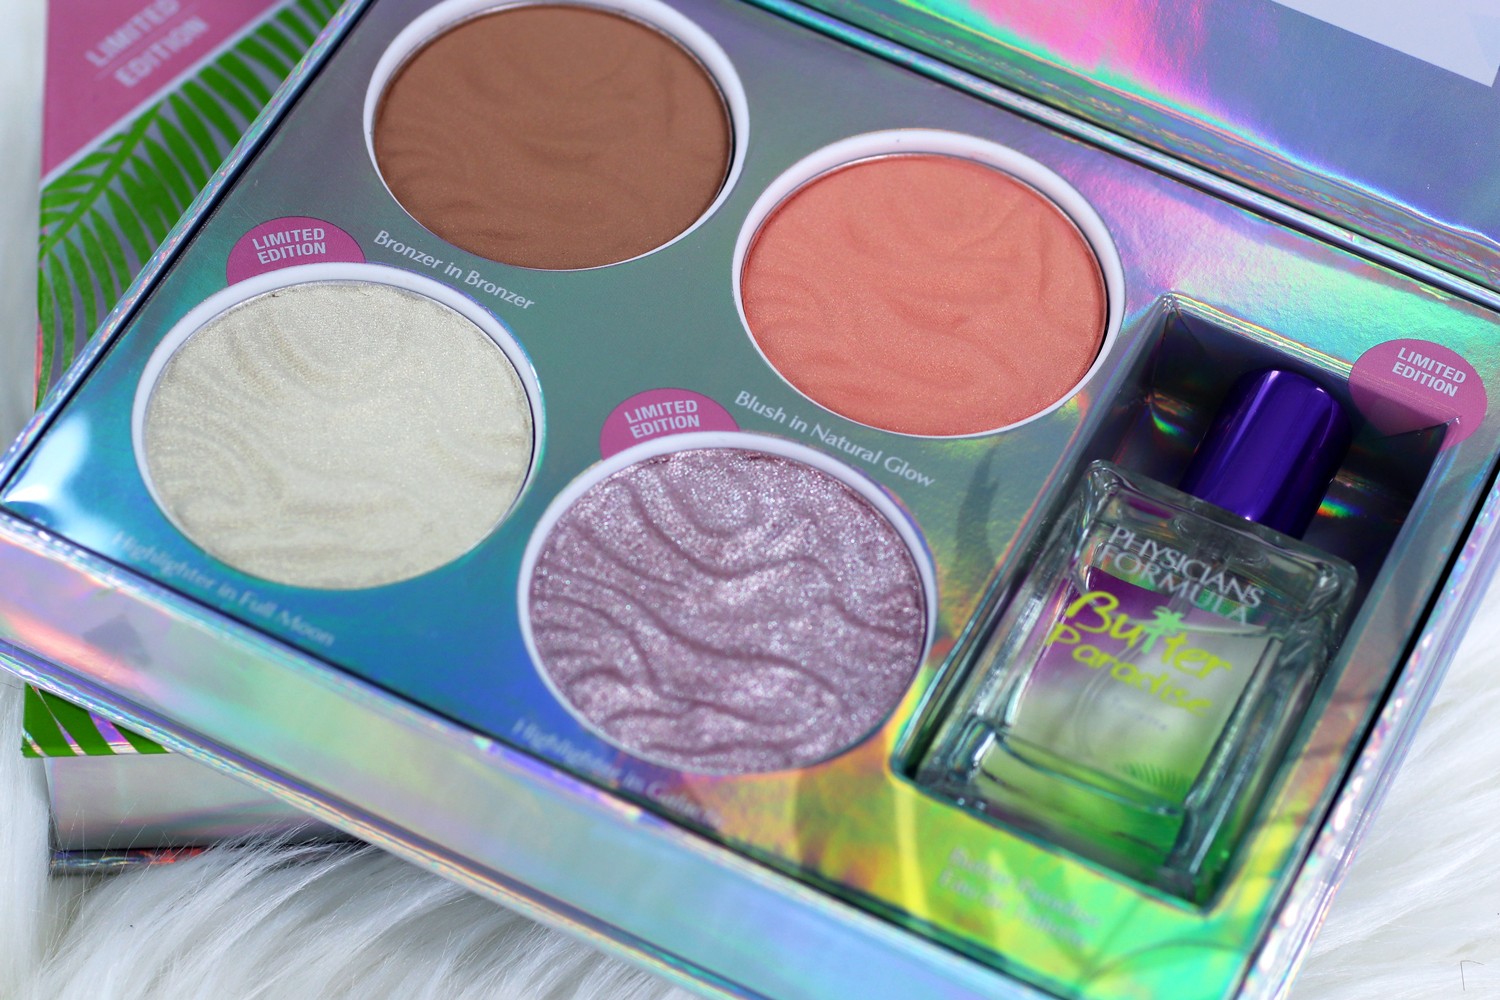 Physicians Formula Butter Collection Palette Light Medium - Review and Swatches by Popular Los Angeles Cruelty Free Beauty Blogger, My Beauty Bunny